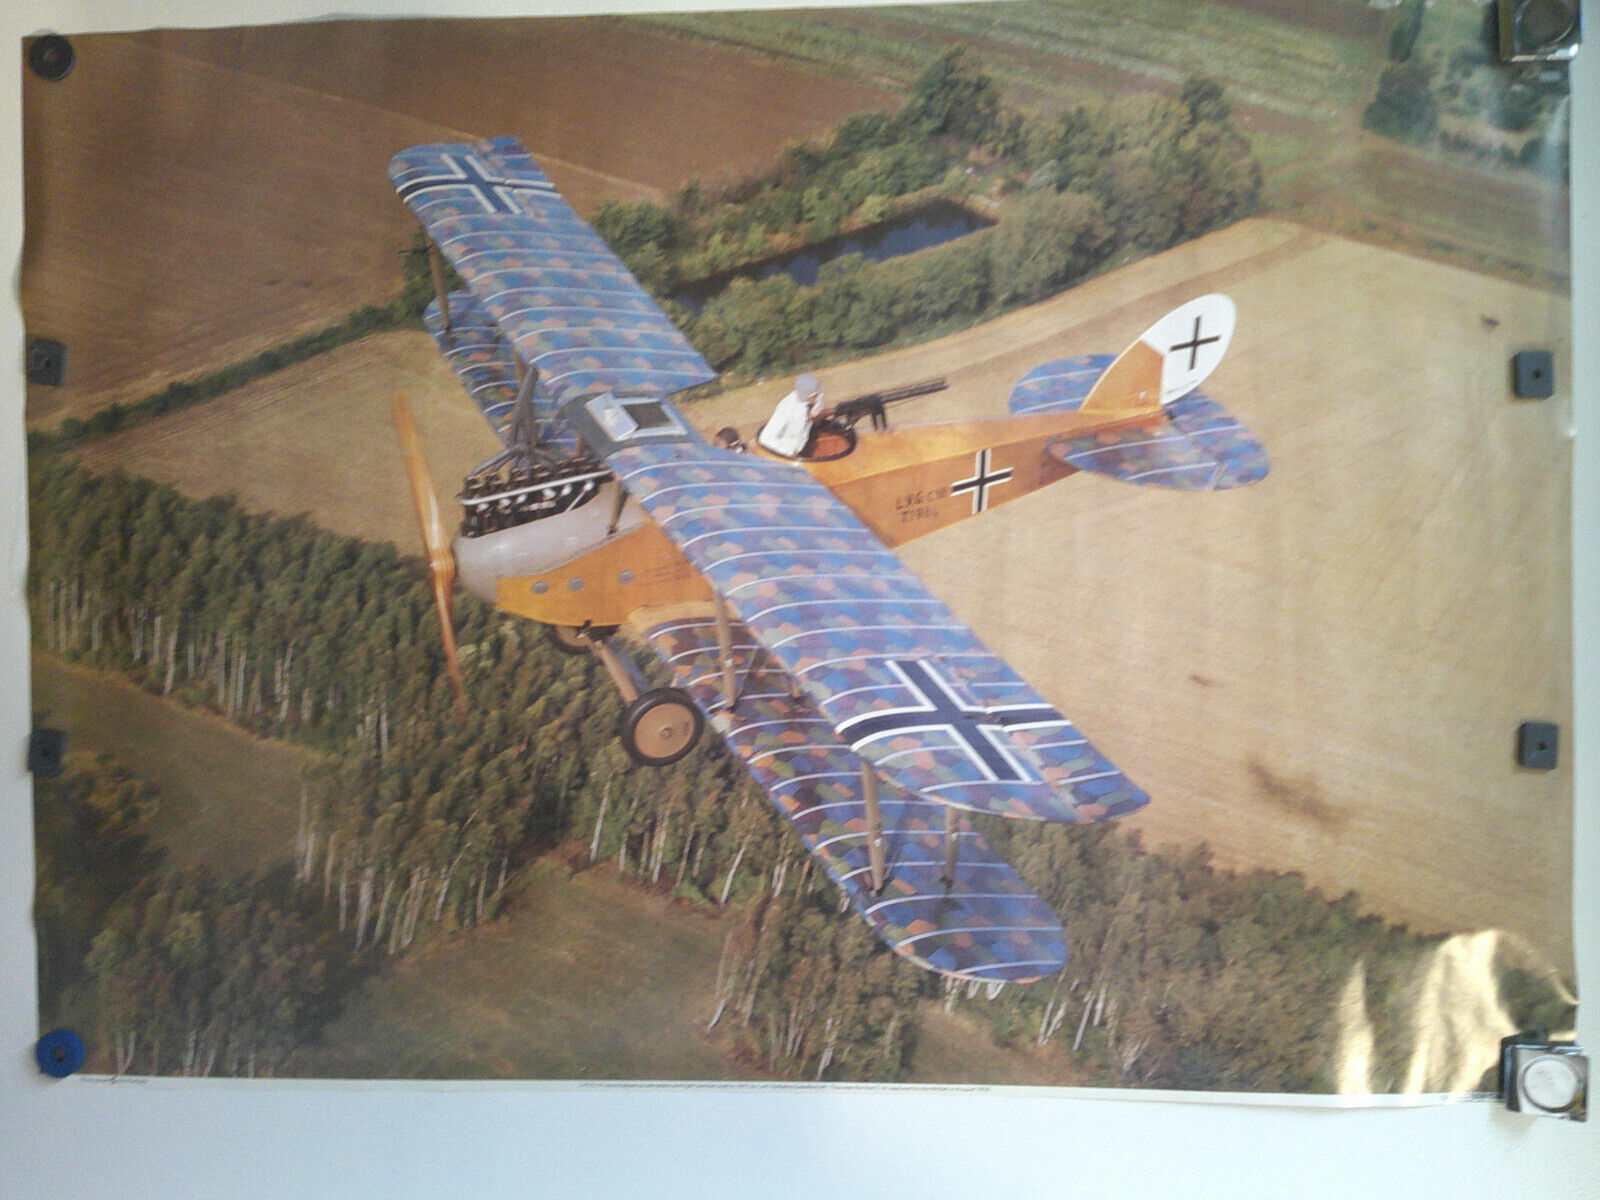 PLAISTOW PICTORIAL #C91 LVG1 OF THE SHUTTLEWORTH COLLECTION POSTER 25